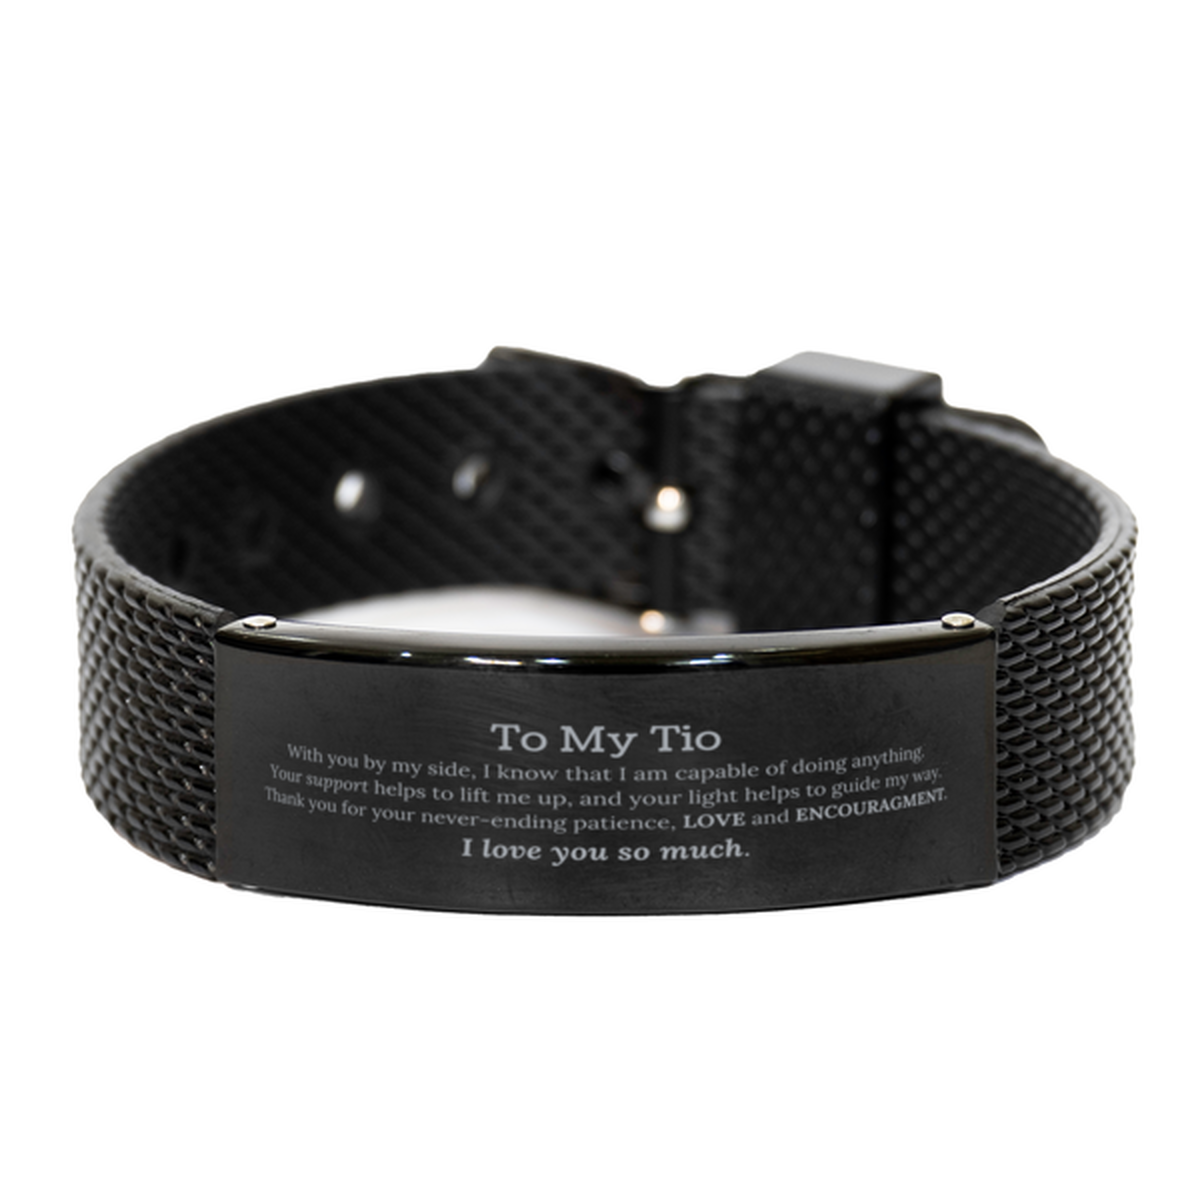 Appreciation Tio Black Shark Mesh Bracelet Gifts, To My Tio Birthday Christmas Wedding Keepsake Gifts for Tio With you by my side, I know that I am capable of doing anything. I love you so much